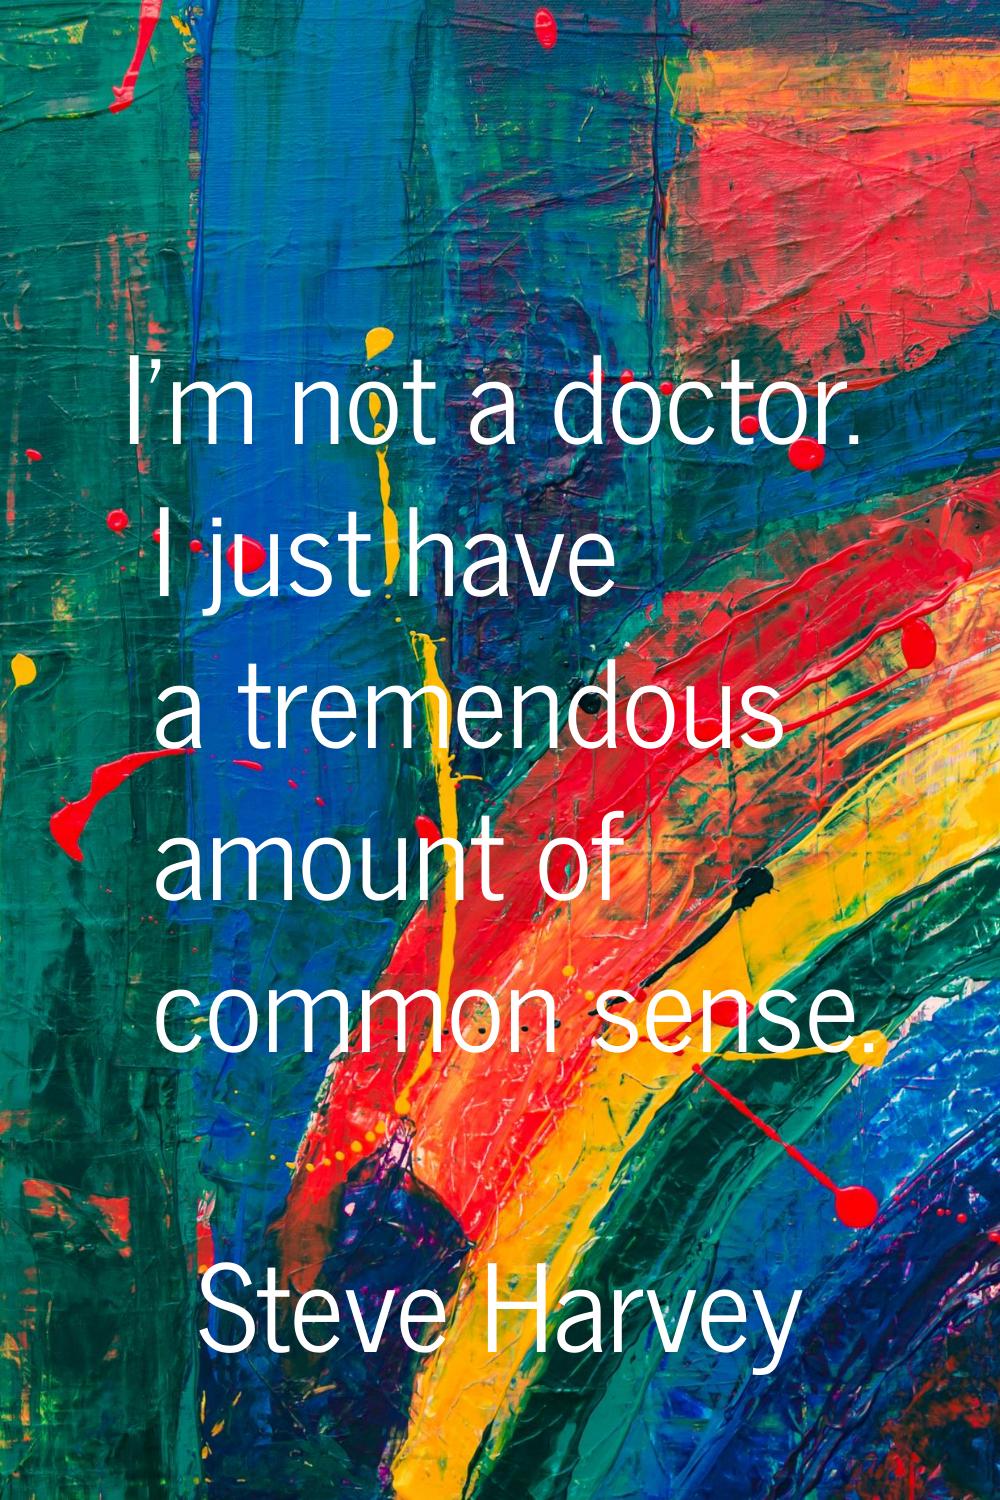 I'm not a doctor. I just have a tremendous amount of common sense.